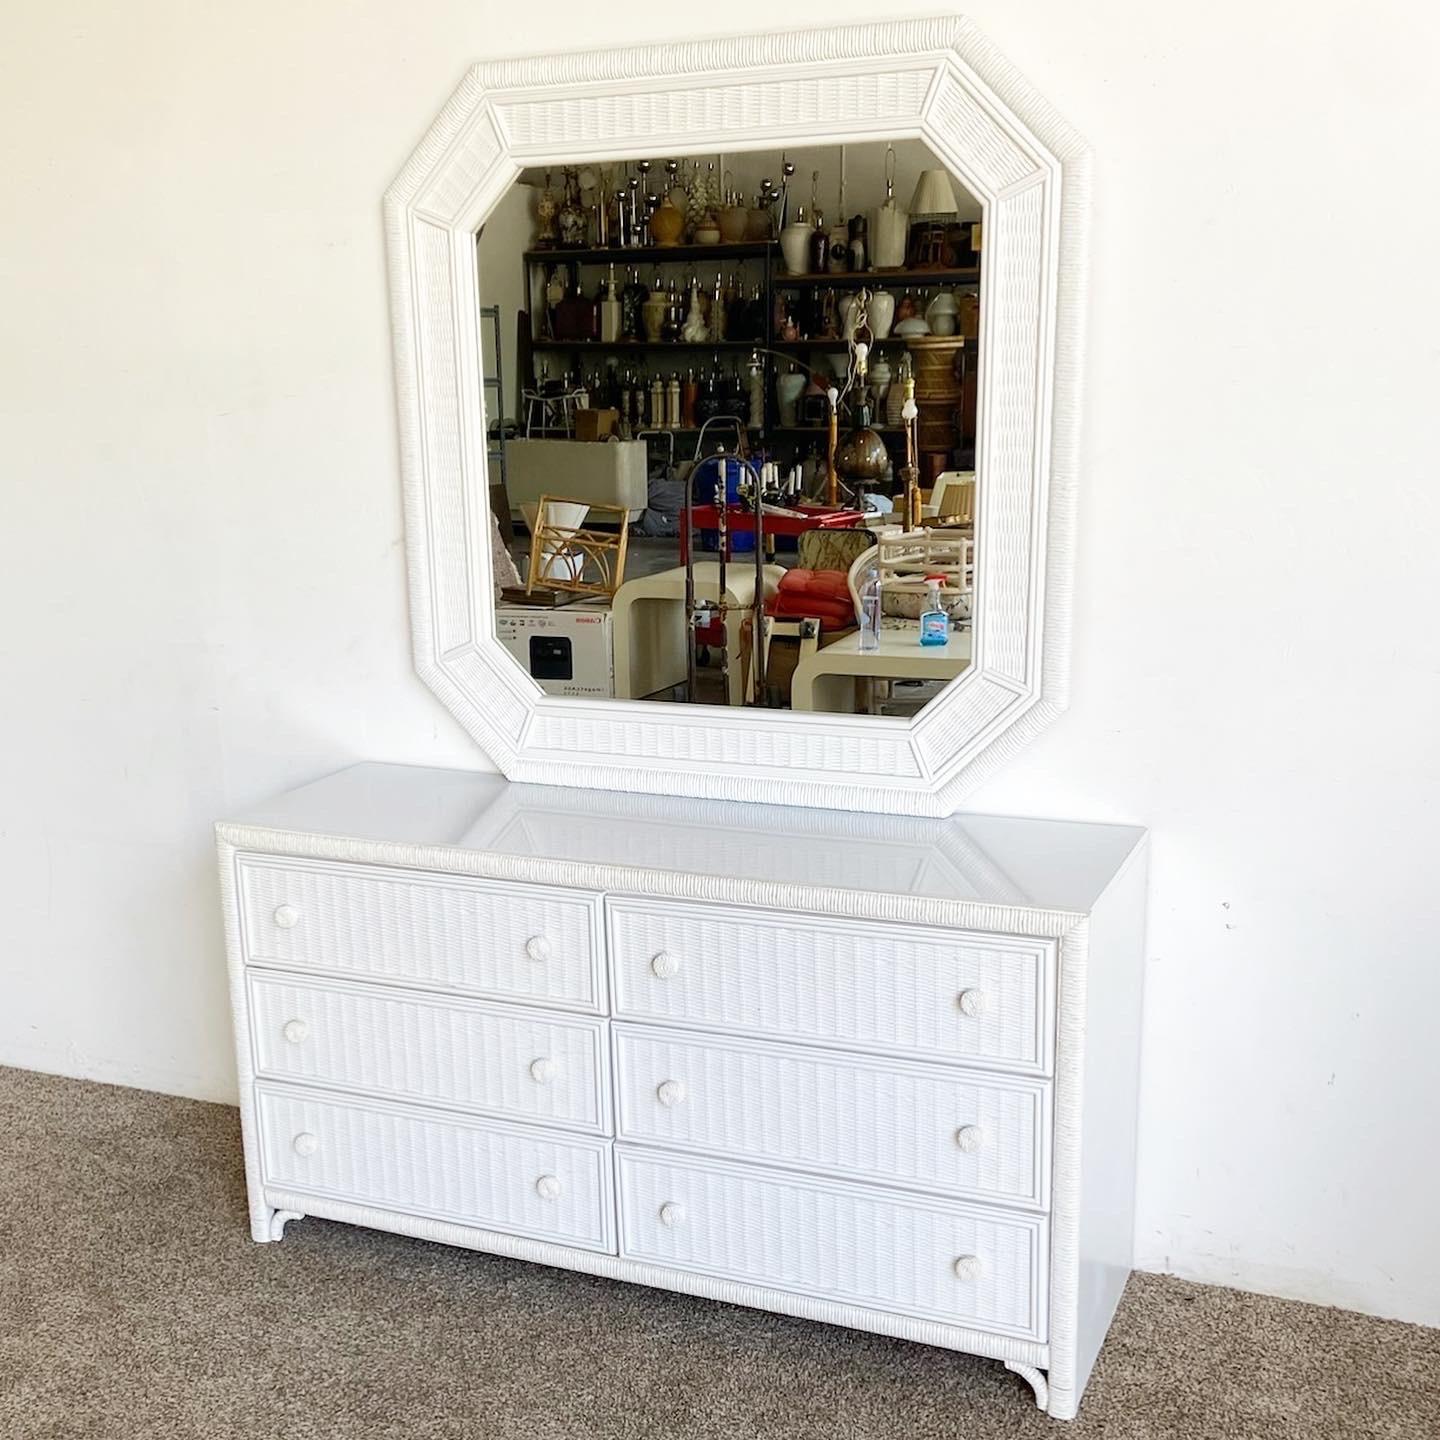 Wonderful vintage boho chic dresser with matching mirror. Features a white finish with a faux rattan framing and faux wicker drawer faces.

Mirror measures 46.5”W, 1”D, 46.5”H.